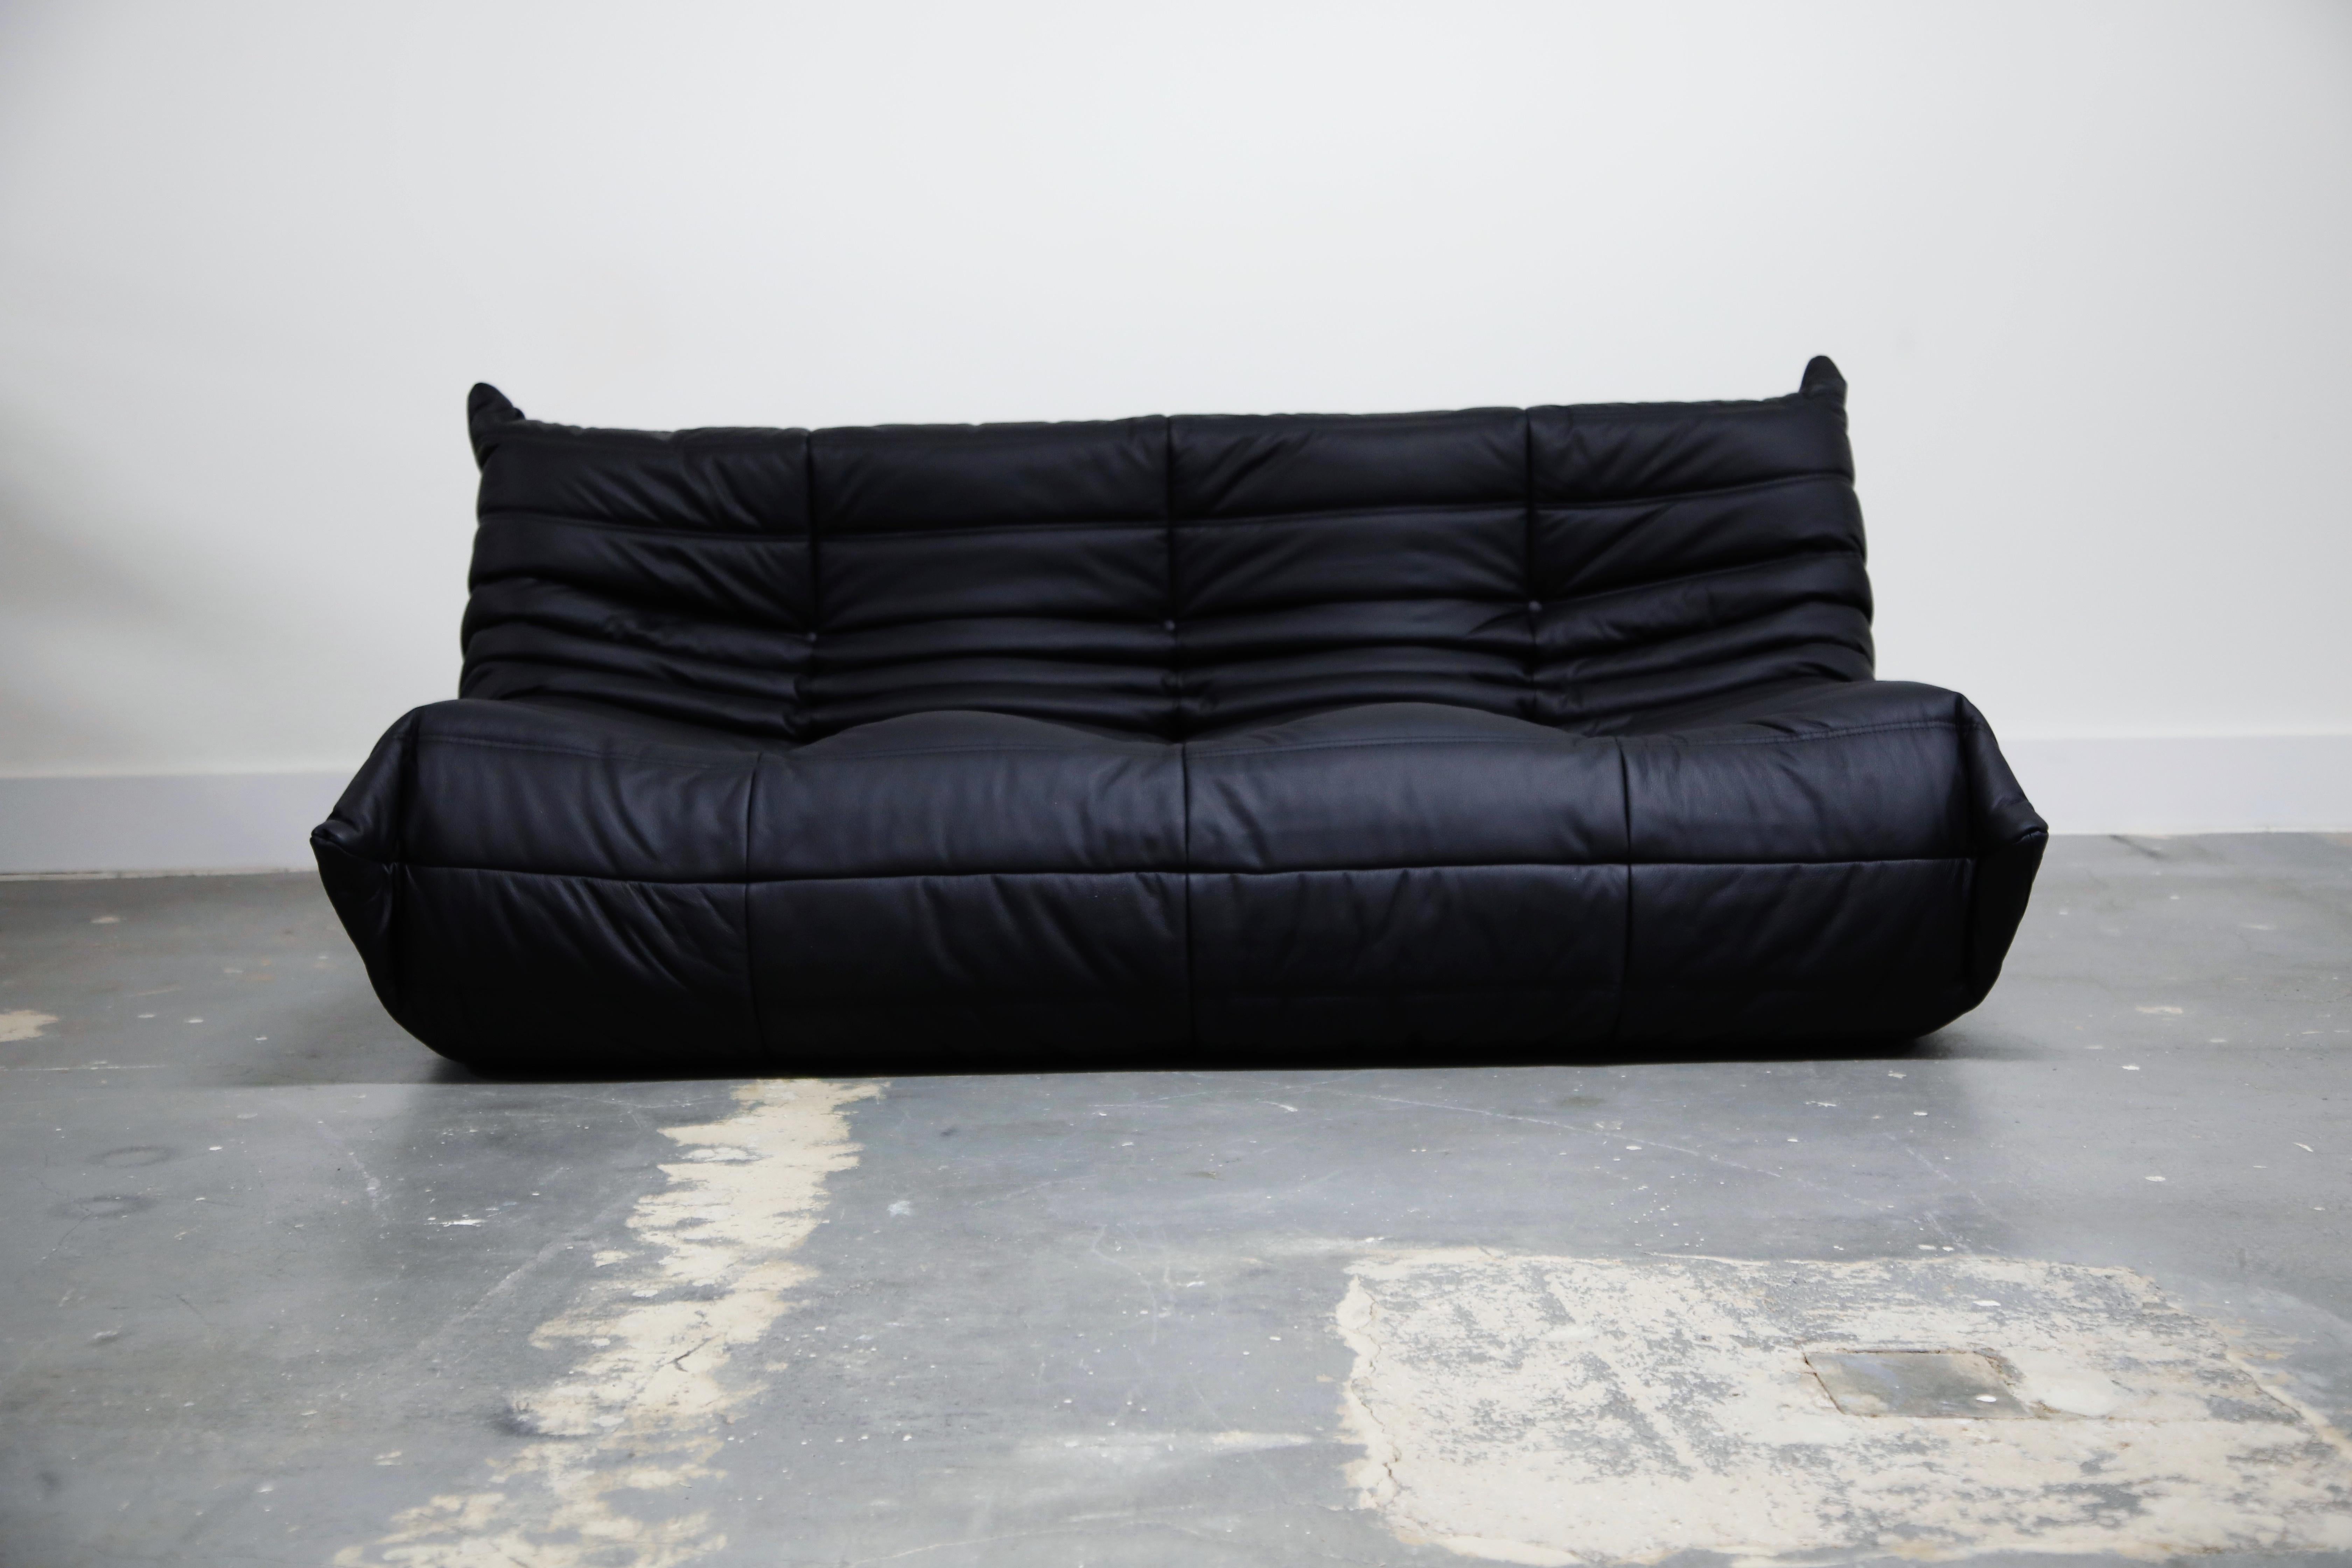 This incredible three piece Togo sectional living room set, was designed by Michel Ducaroy in 1973 for Ligne Roset, France. This set was completely restored with new high grade Bovine leather upholstery in a black color, and bottom decking fabric